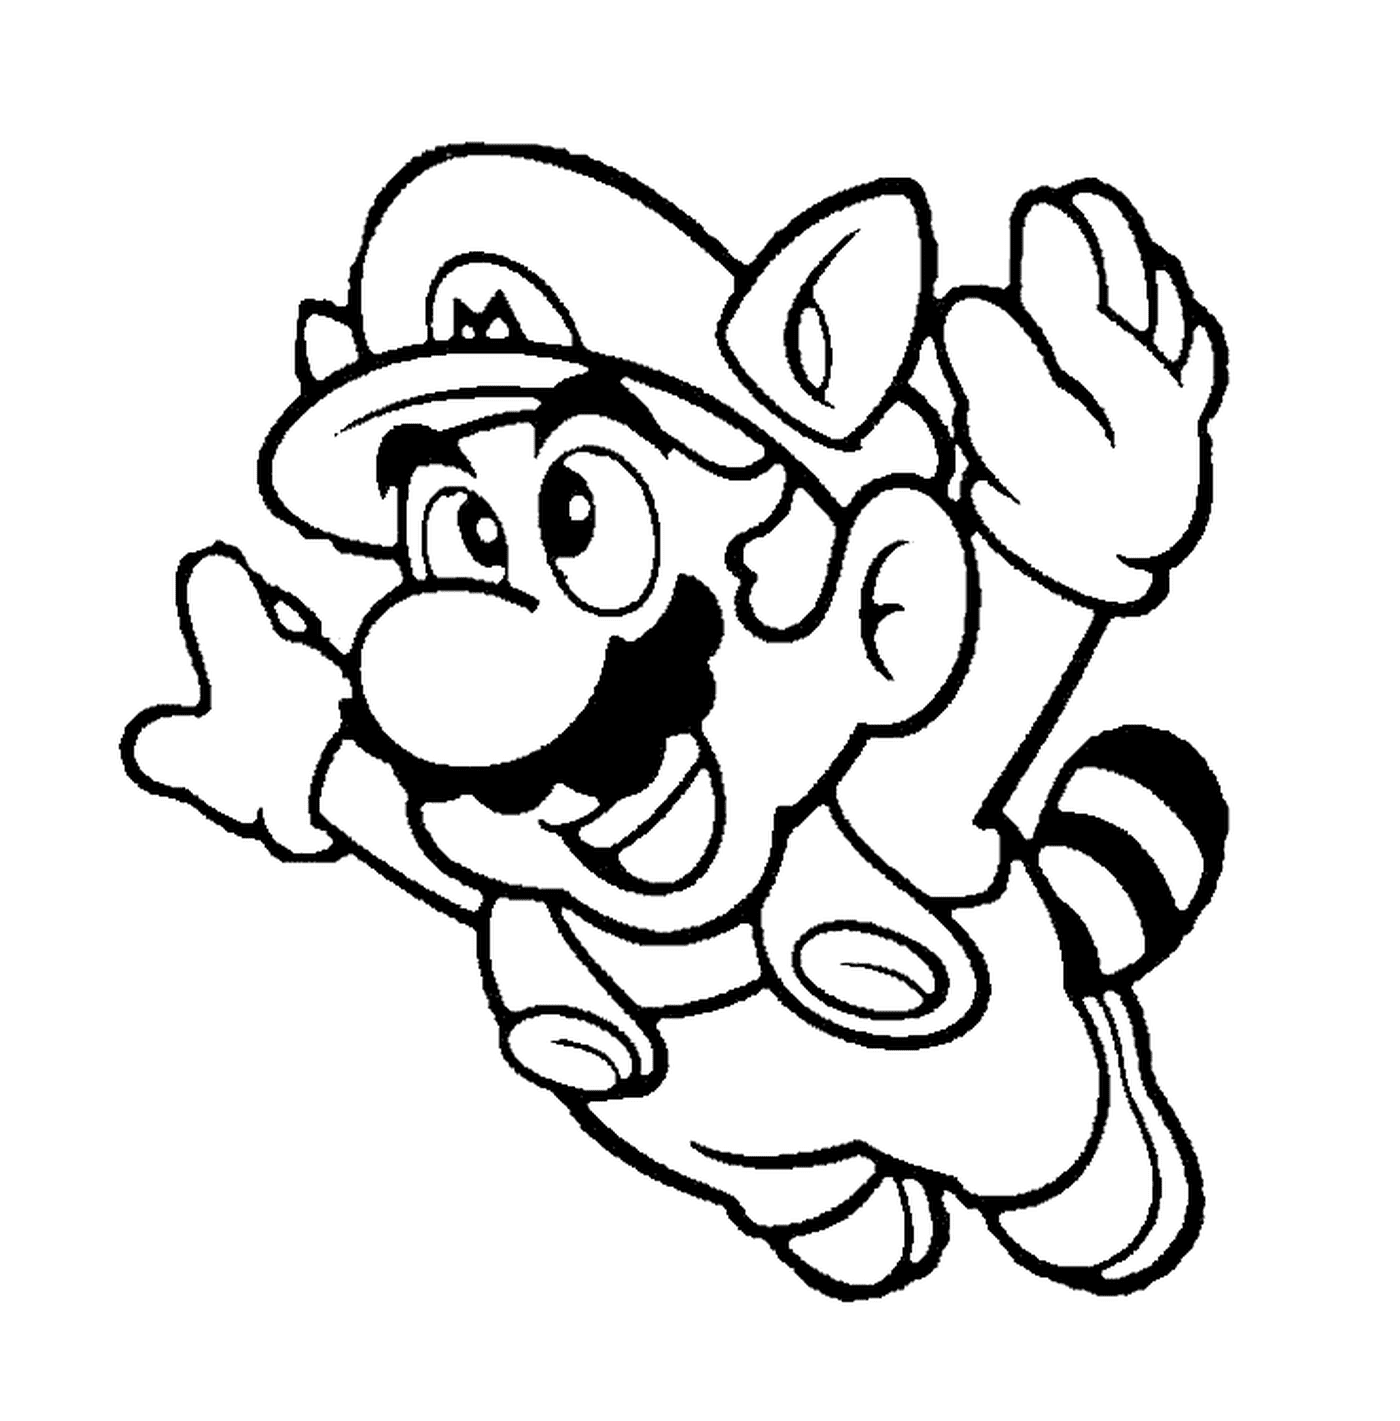  Mario in raccoon, ready for action 